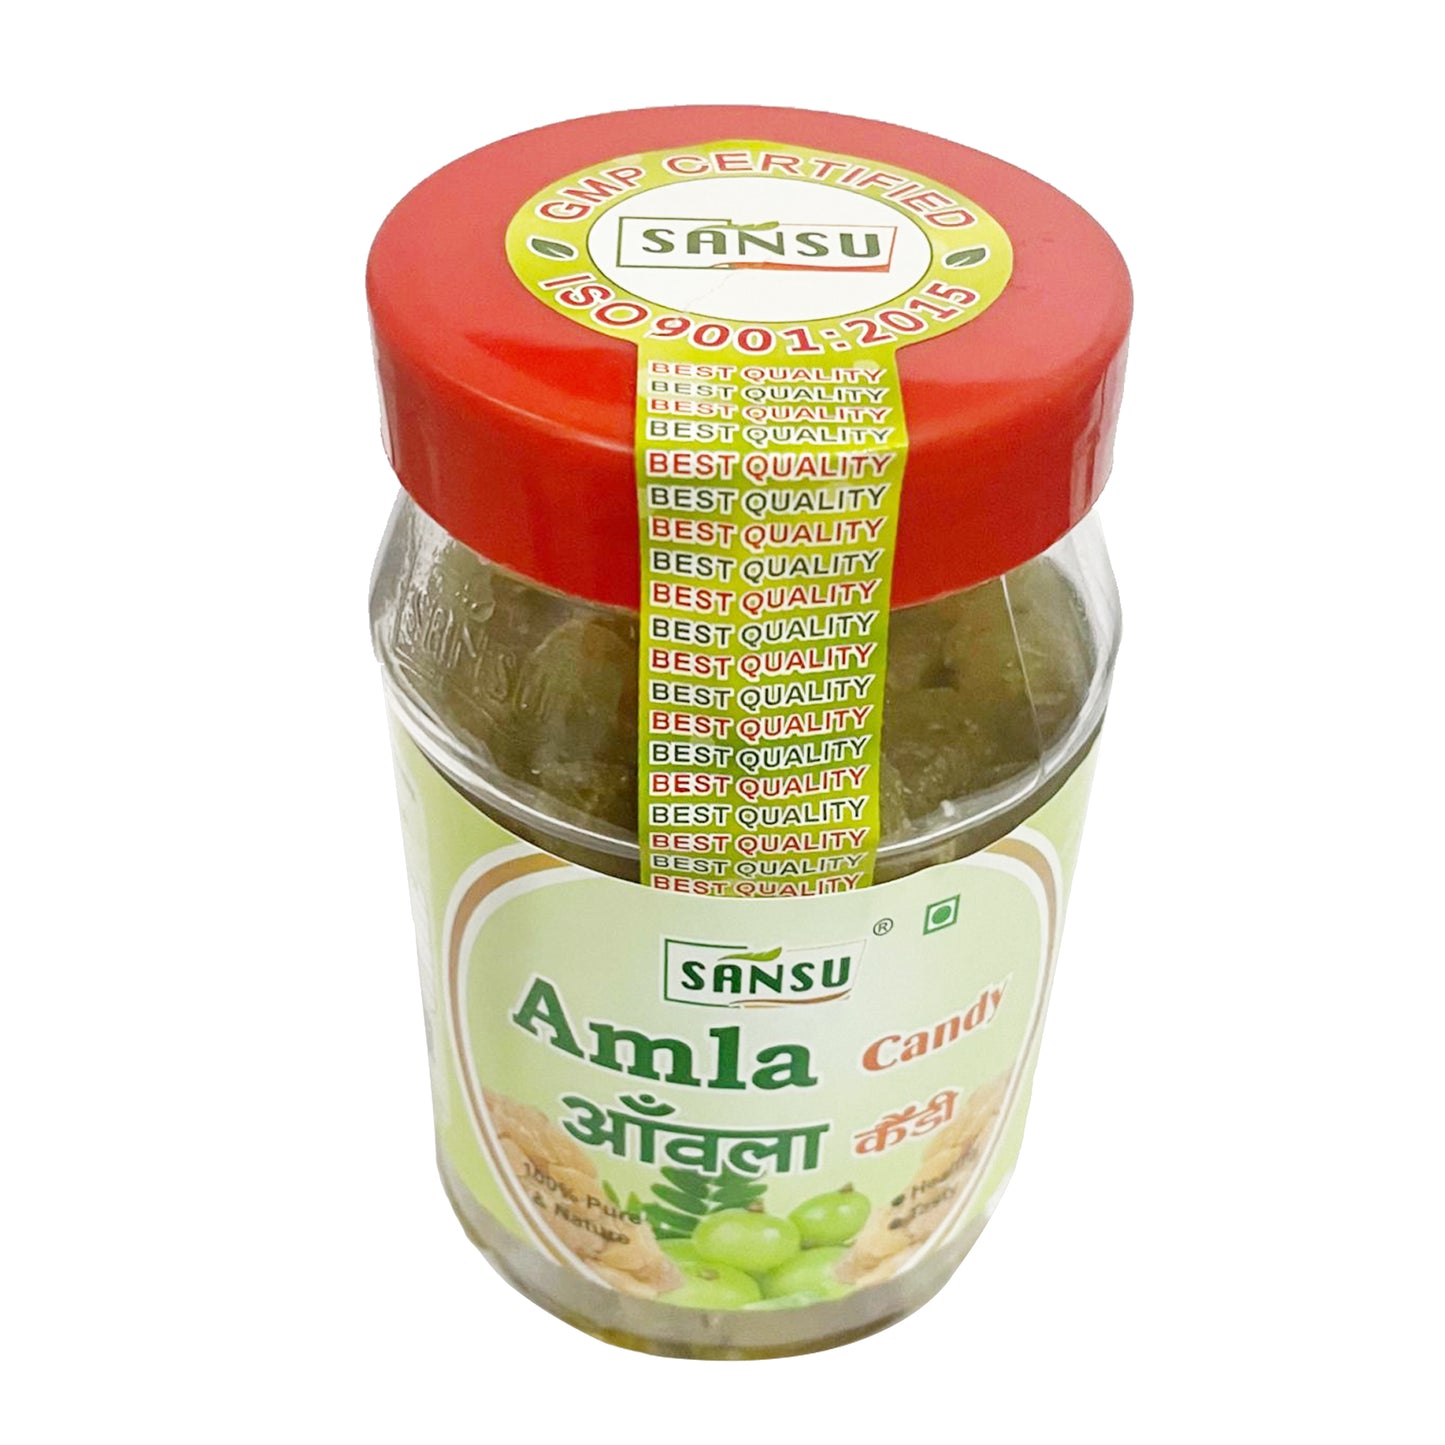 SANSU Sweet Amla Mingle Candy, Dehydrated Candies, Diet Sugar Friendly, 100% Natural, No added Preservatives, 200g (Pack of 2)